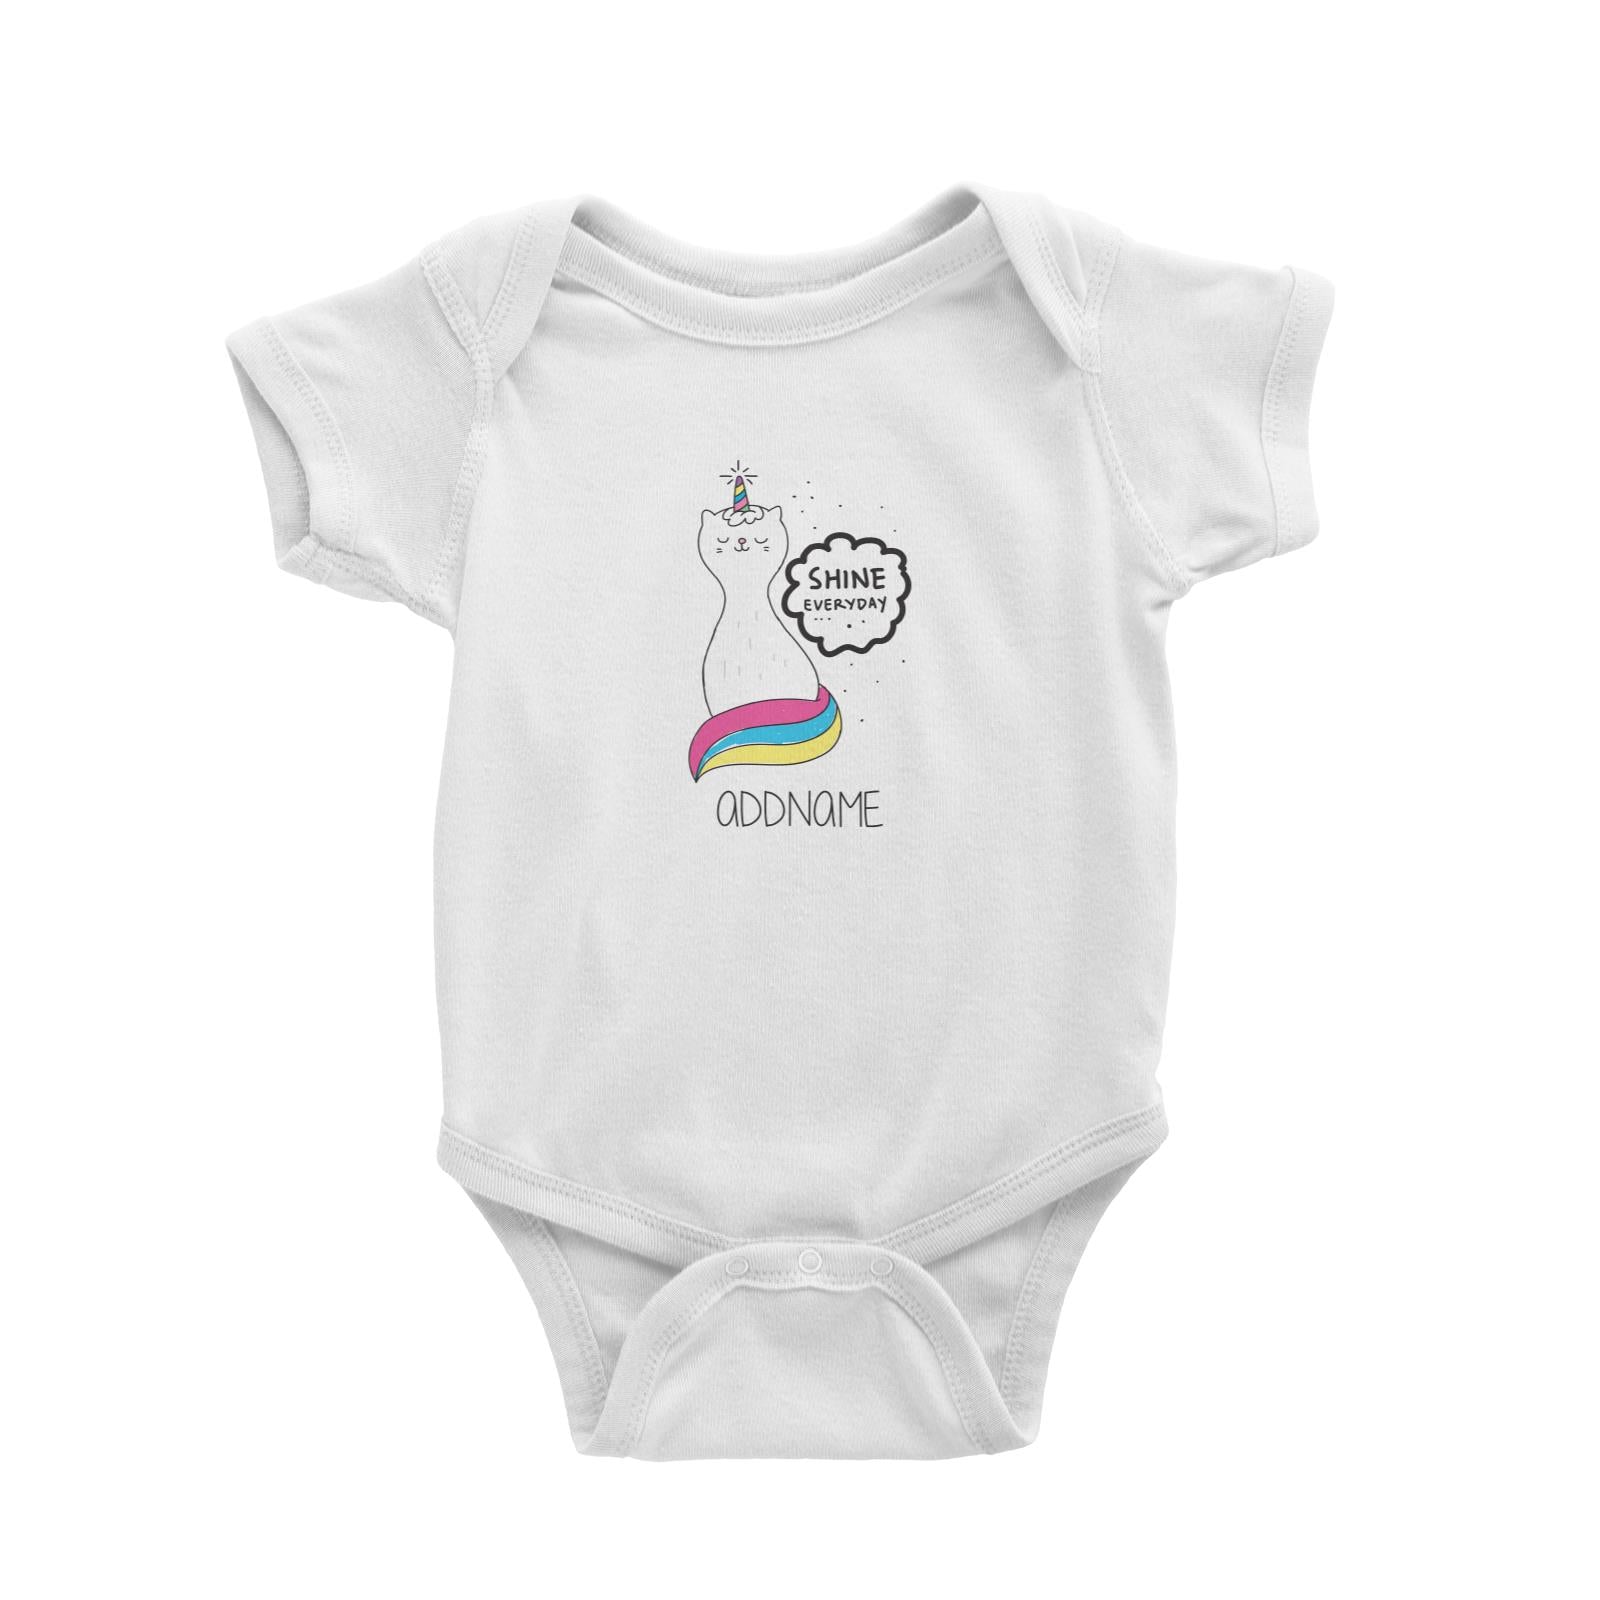 Cool Cute Animals Cats Unicorn Cat Shine Everyday Addname Baby Romper